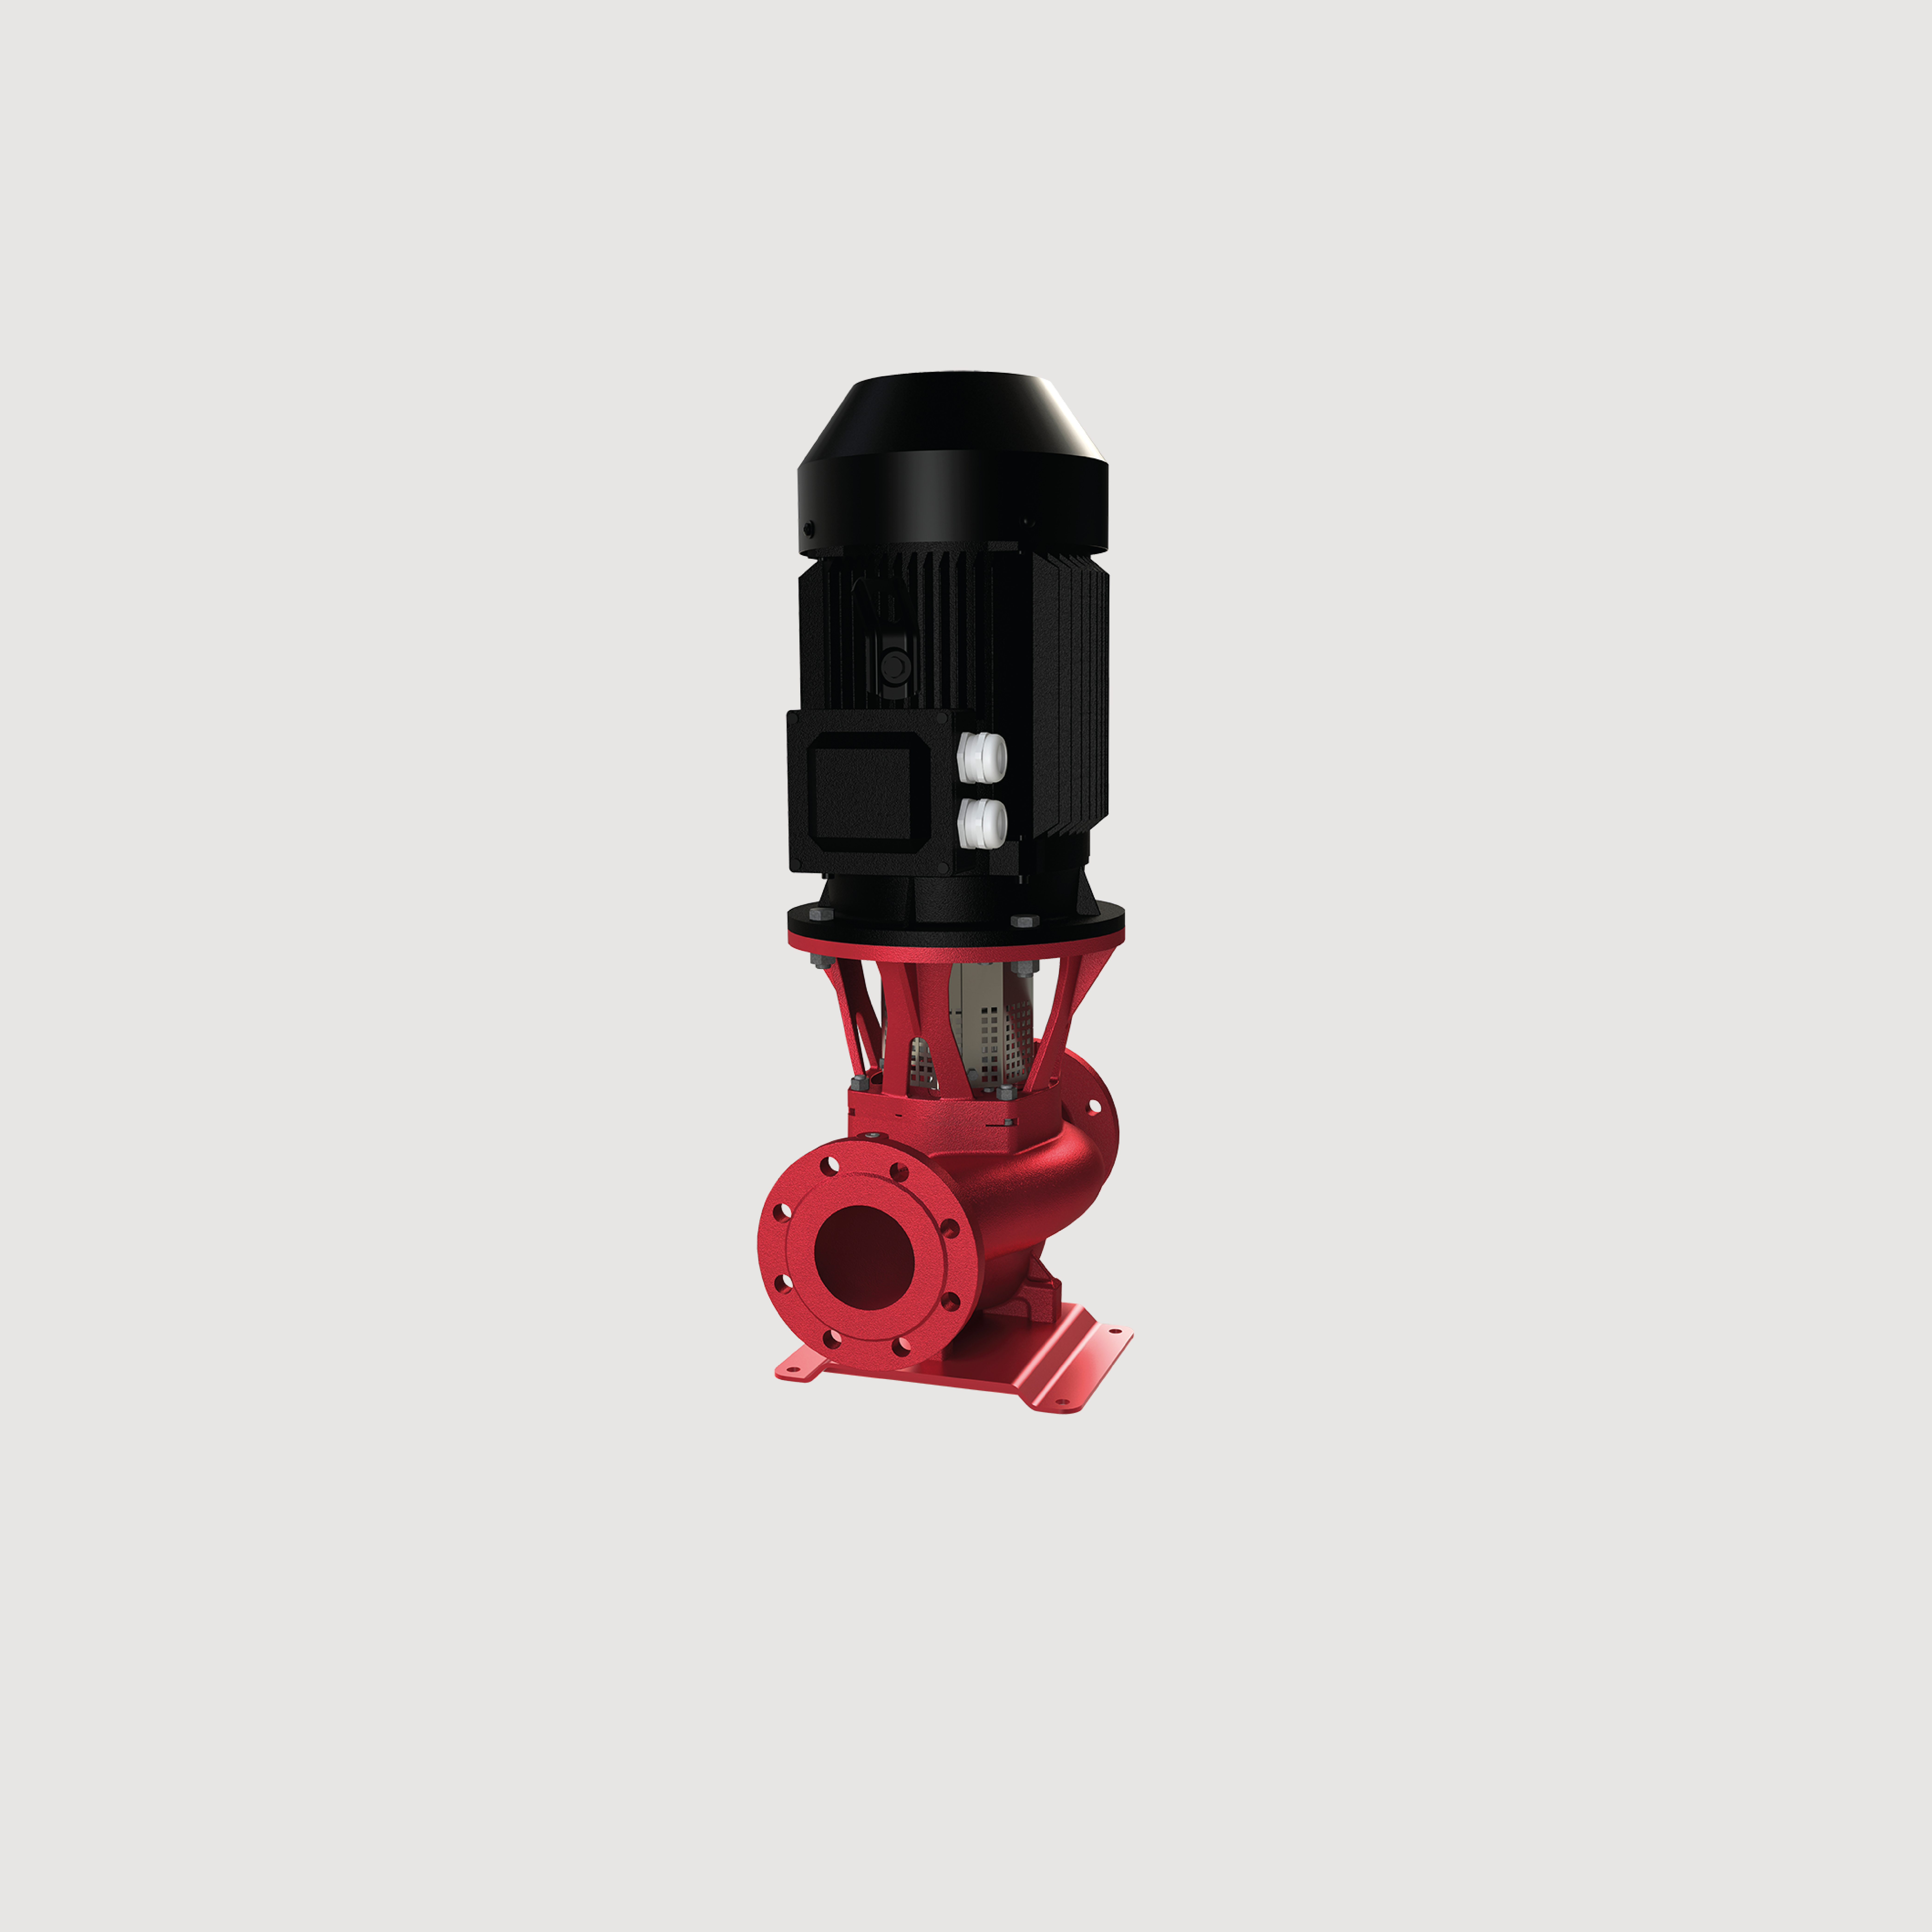 New KI pump series - In-line Single Stage Centrifugal Pumps with IEC-motors